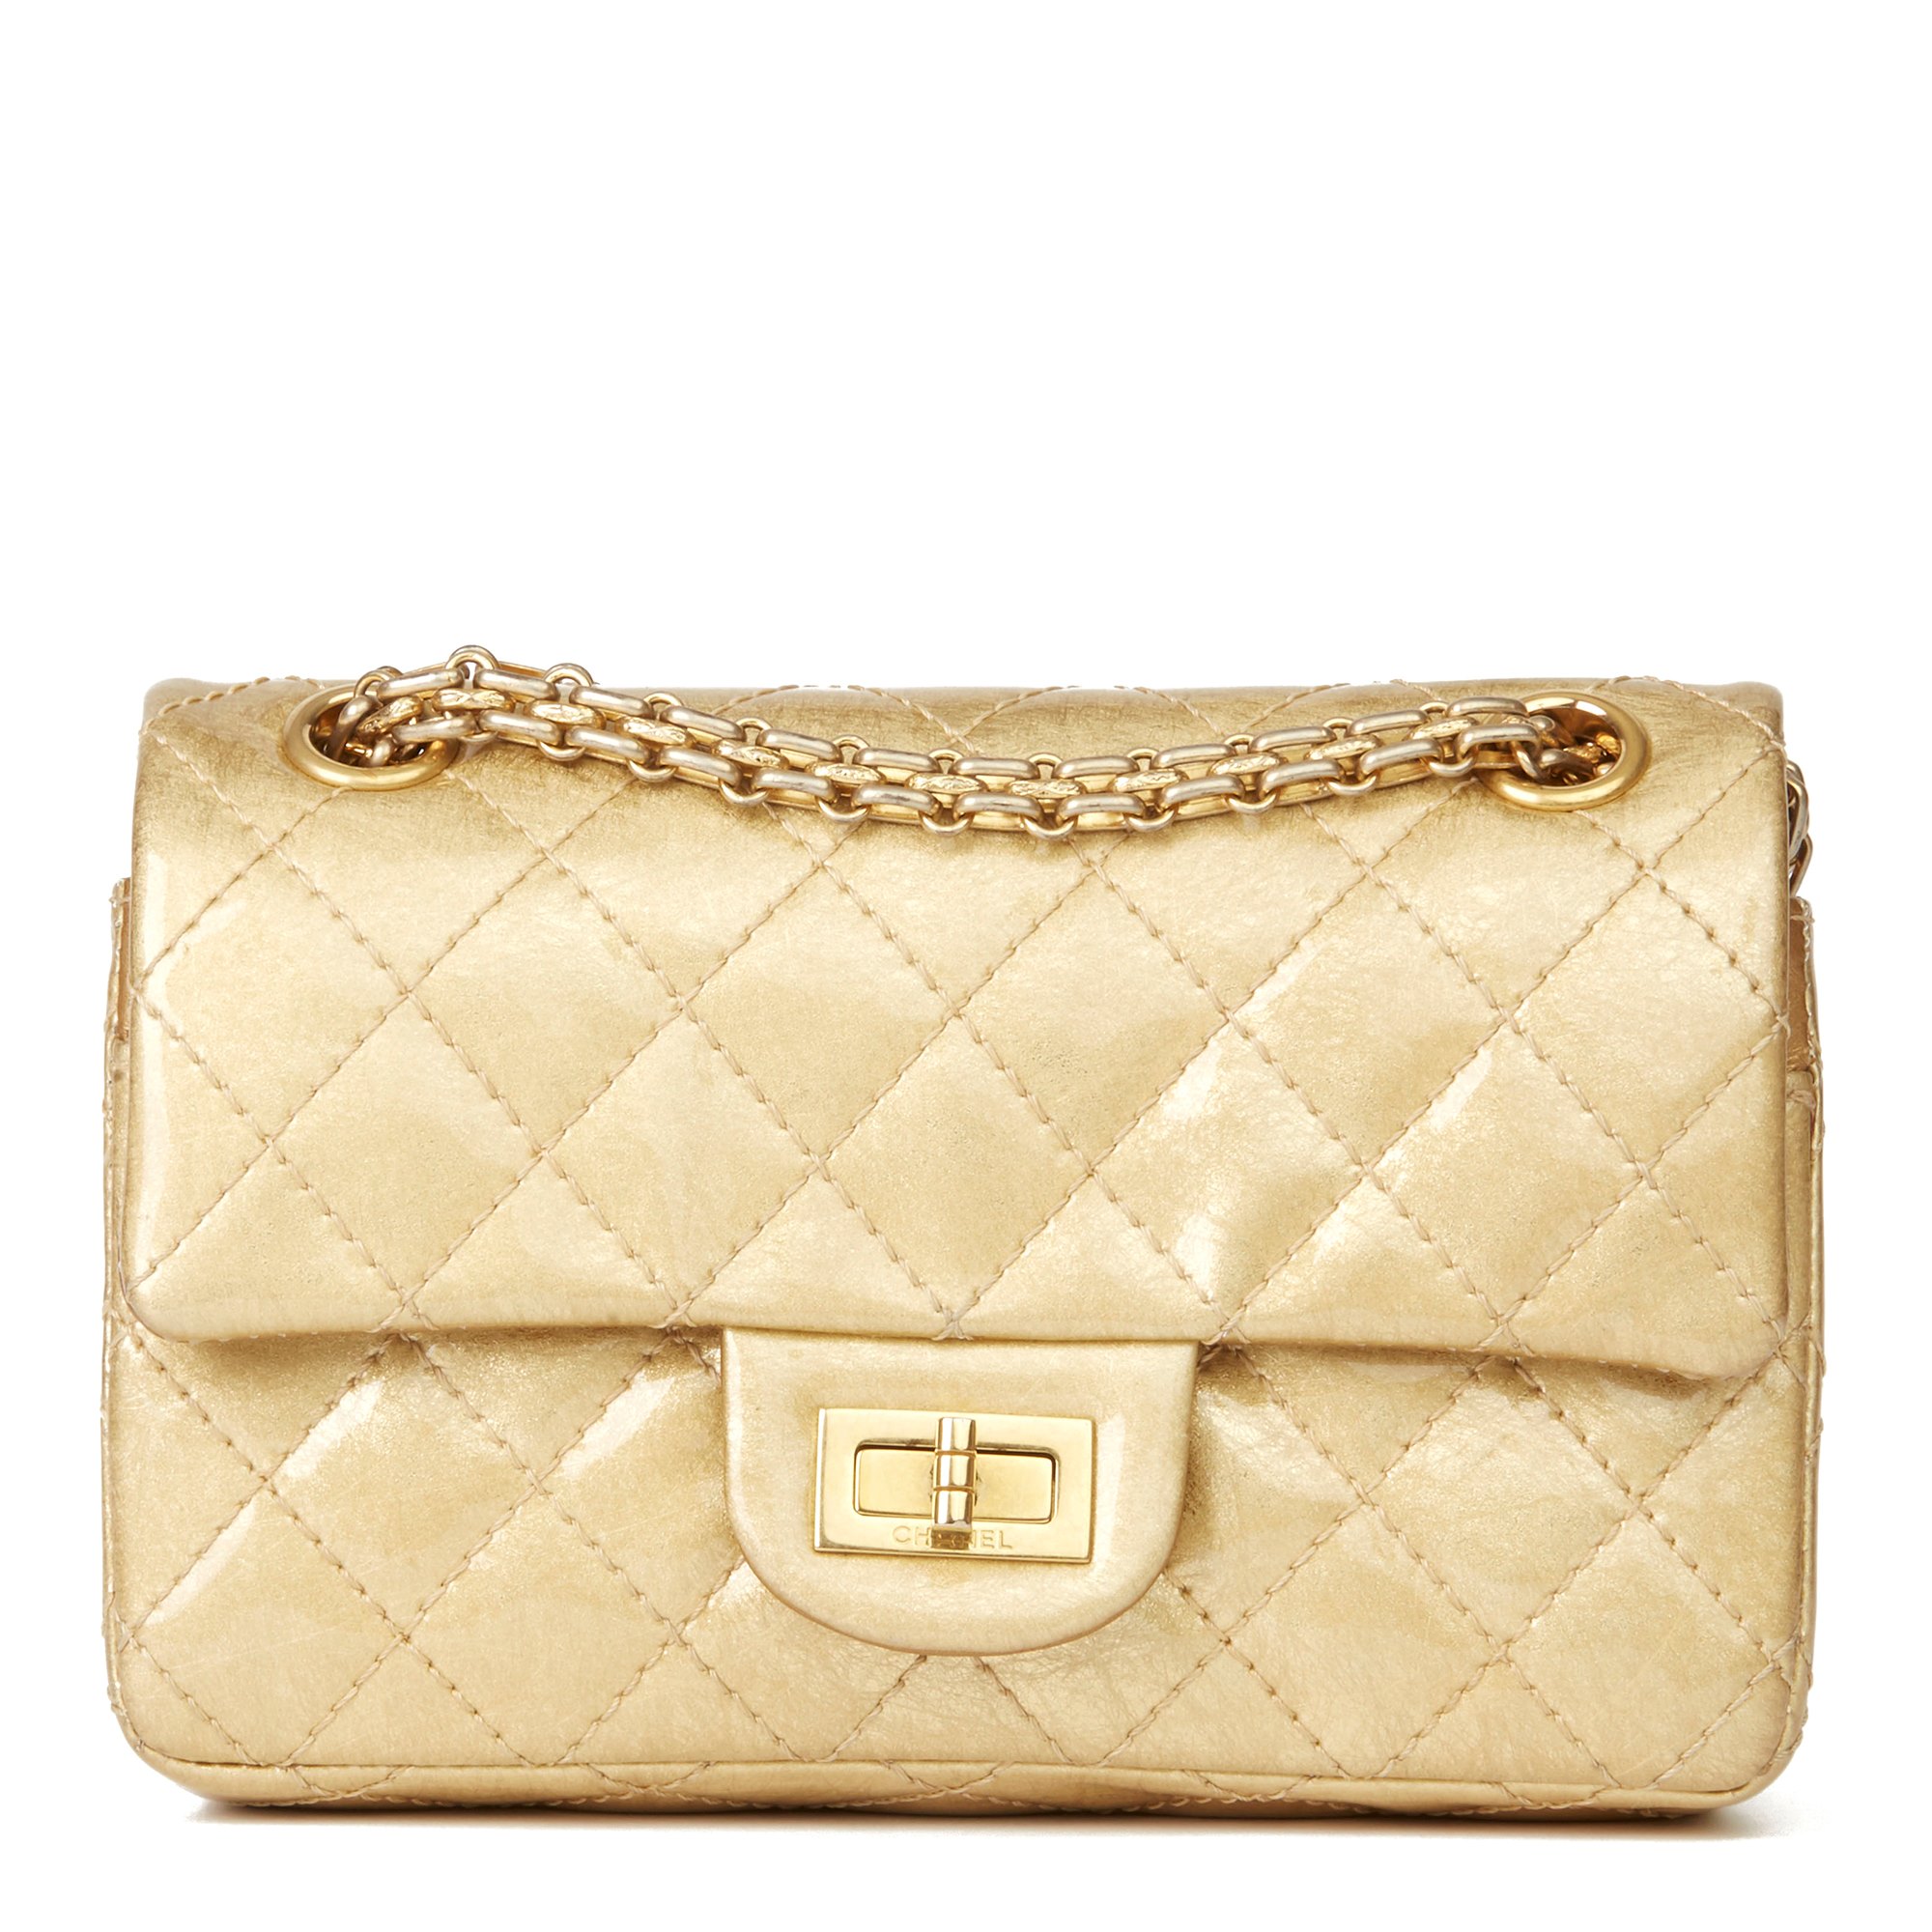 Chanel  Reissue 224 Double Flap Bag 2010's HB2984 | Second Hand Handbags